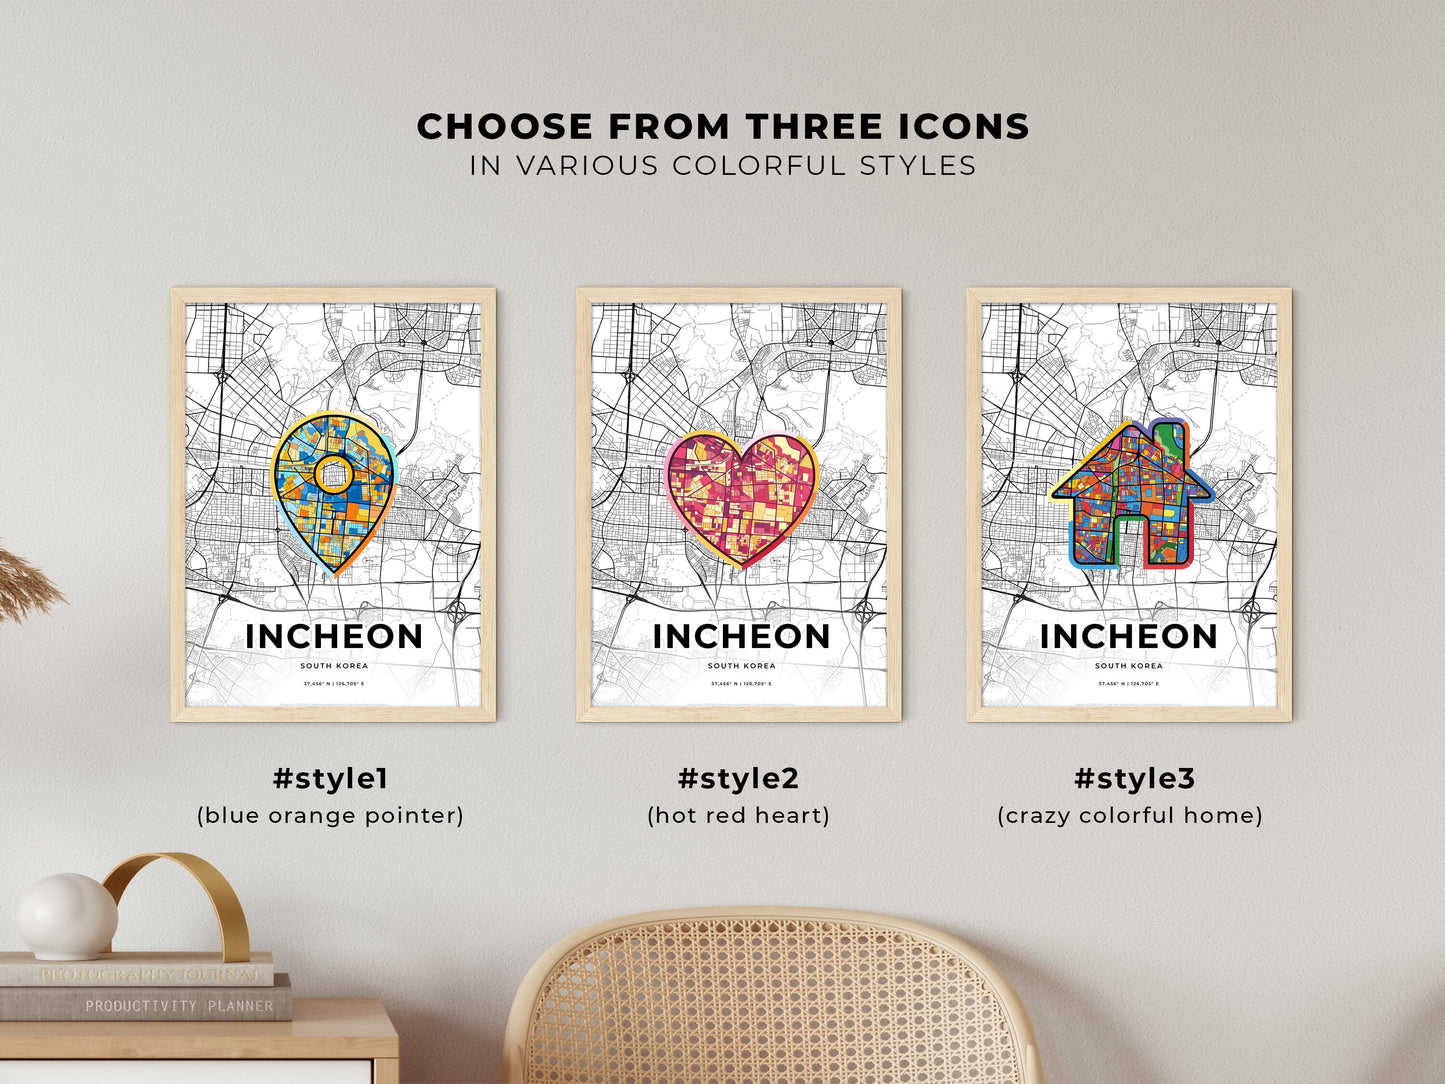 INCHEON SOUTH KOREA minimal art map with a colorful icon. Where it all began, Couple map gift.